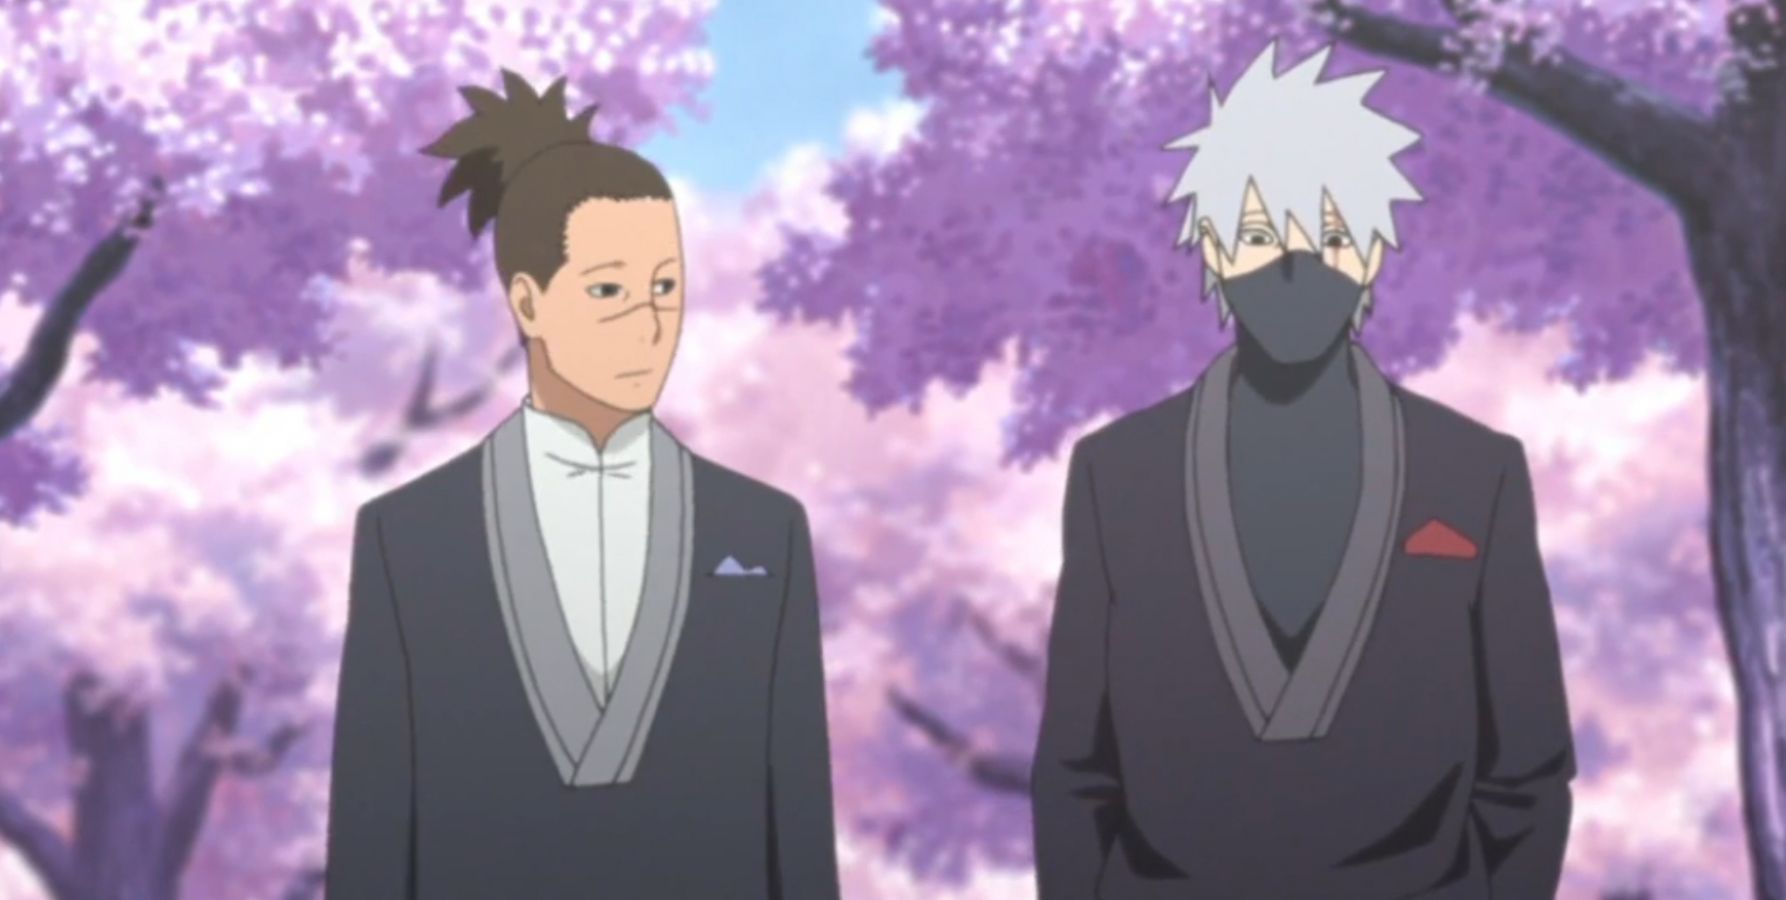 Iruka and Kakashi stand in front of the trees for Naruto and Hinata's wedding in Naruto Shippuden